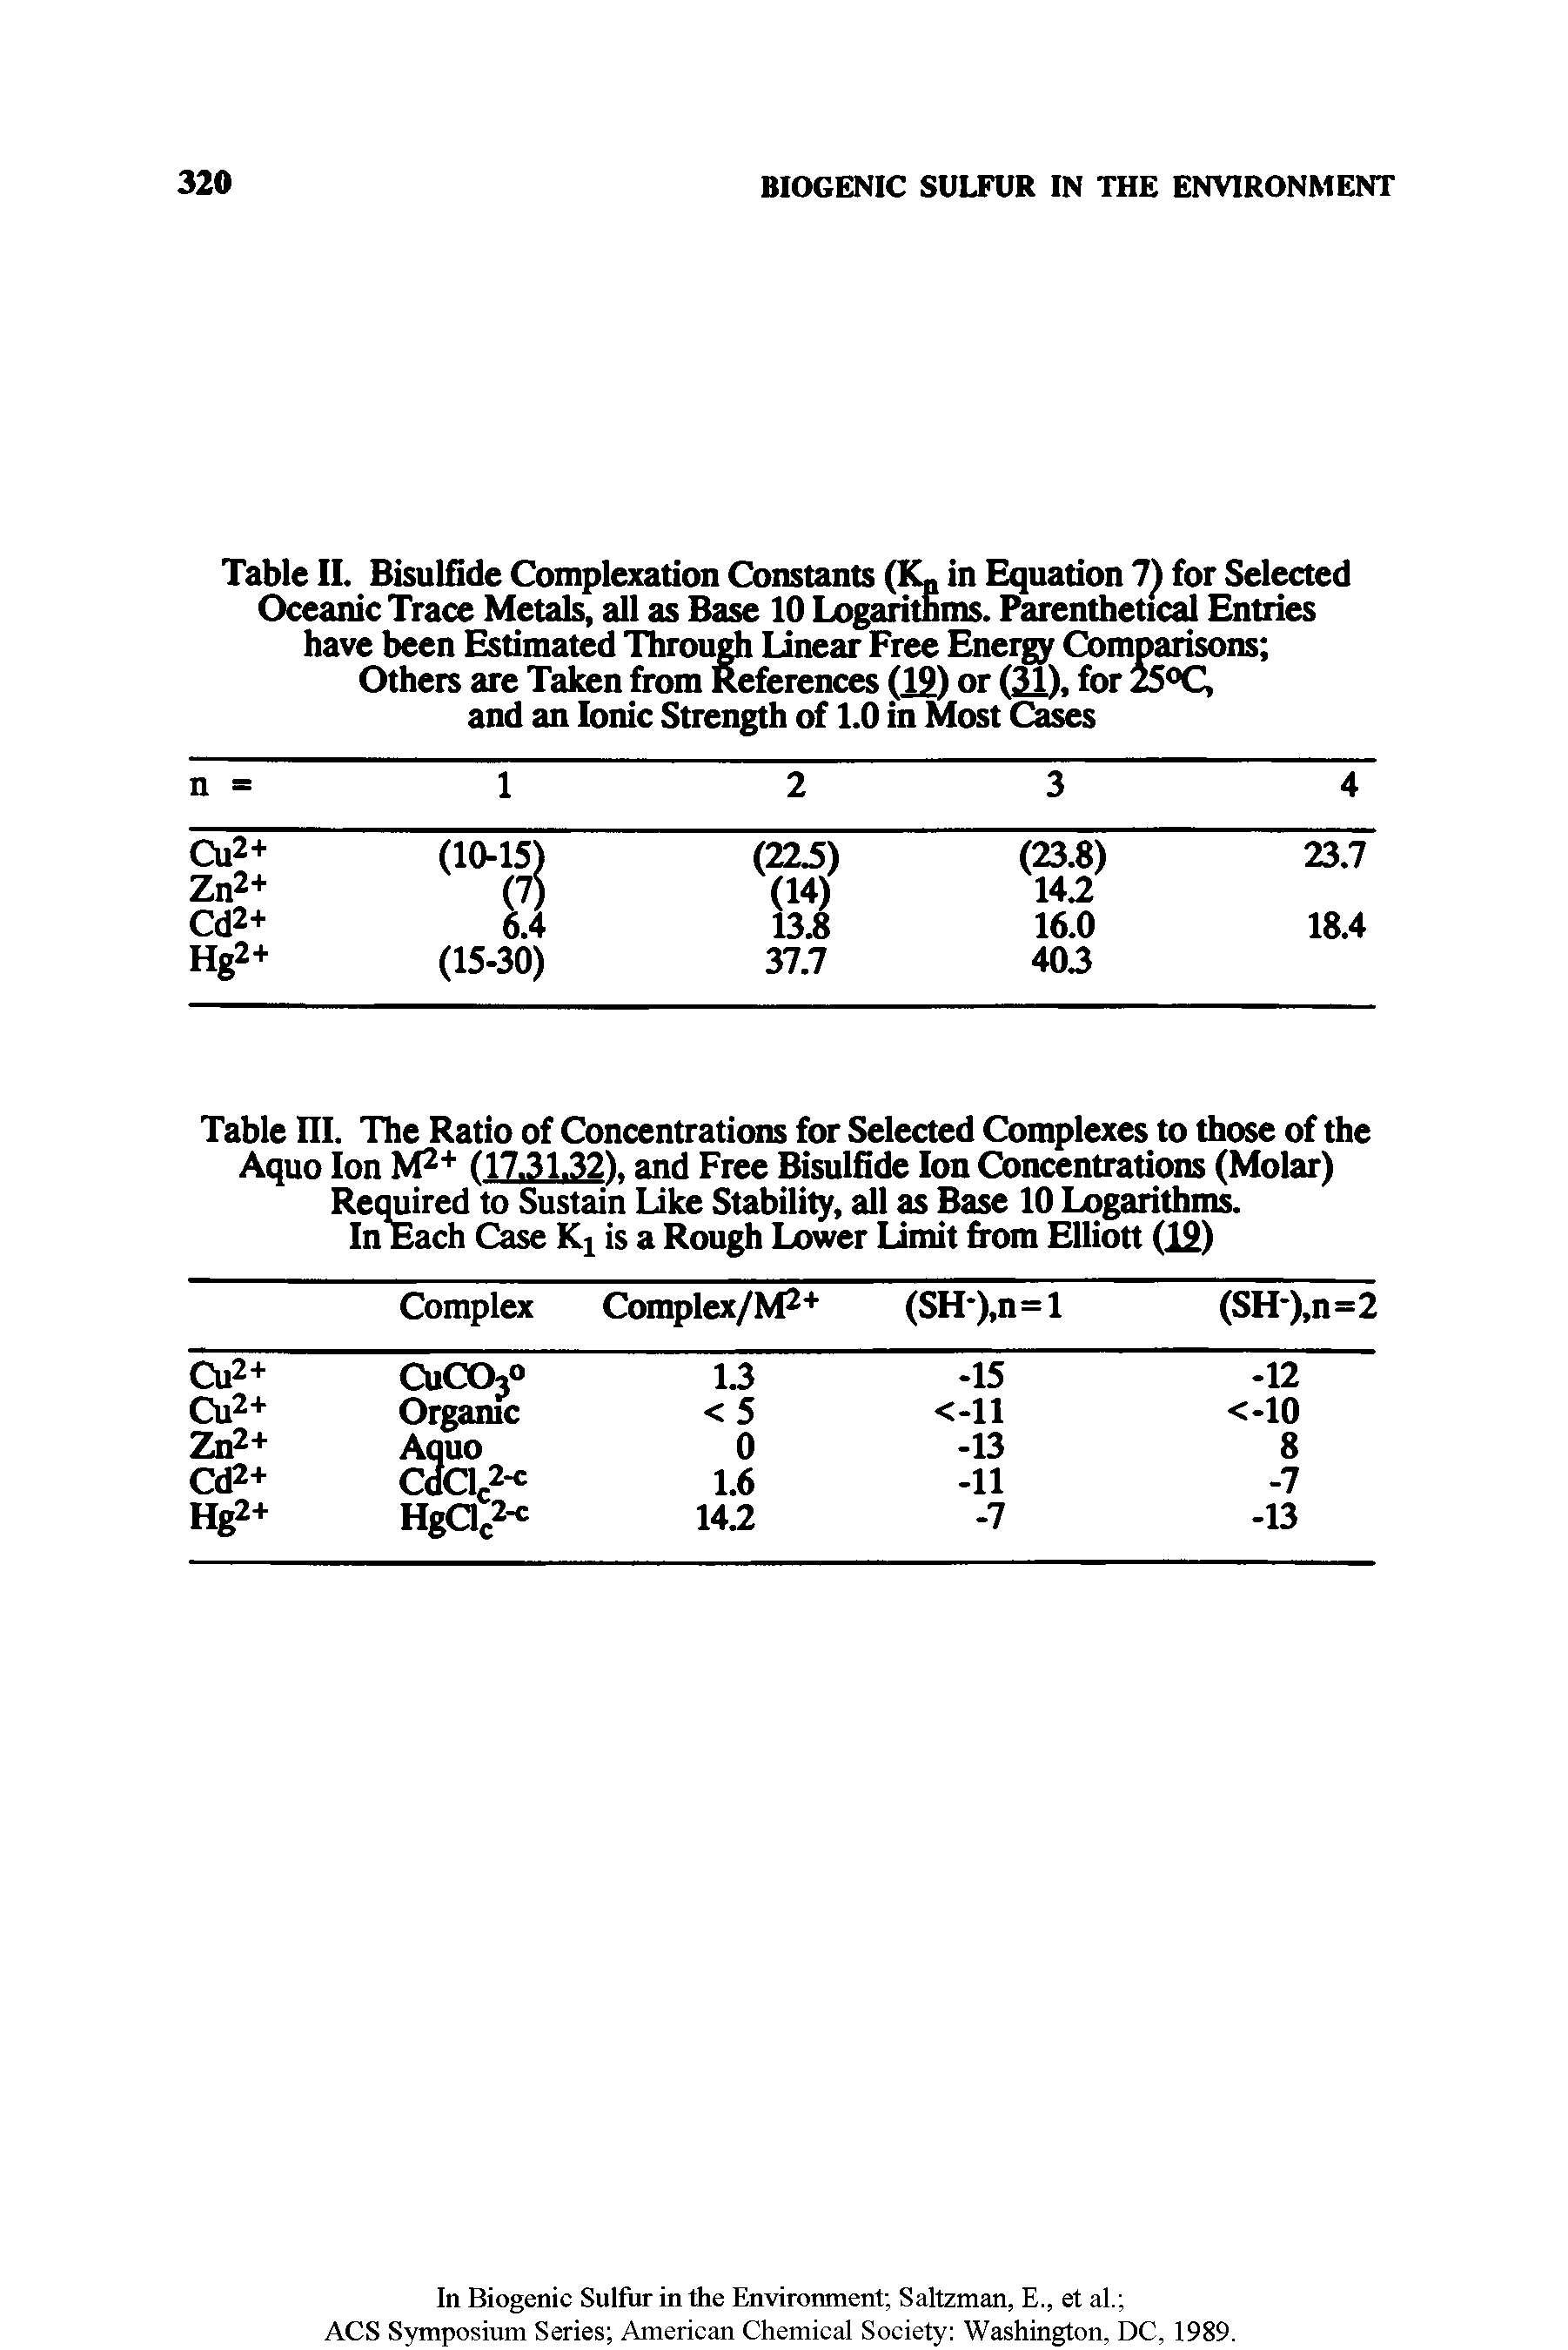 Table II. Bisulfide Complexation Constants (K in Equation 7) for Selected Oceanic Trace Metals, all as Base 10 Logarithms. Parenthetical Entries have been Estimated Through linear Free Energy Comparisons Others are Taken from References (191 or (311. for 25°C, and an Ionic Strength of 1.0 in Most Cases...